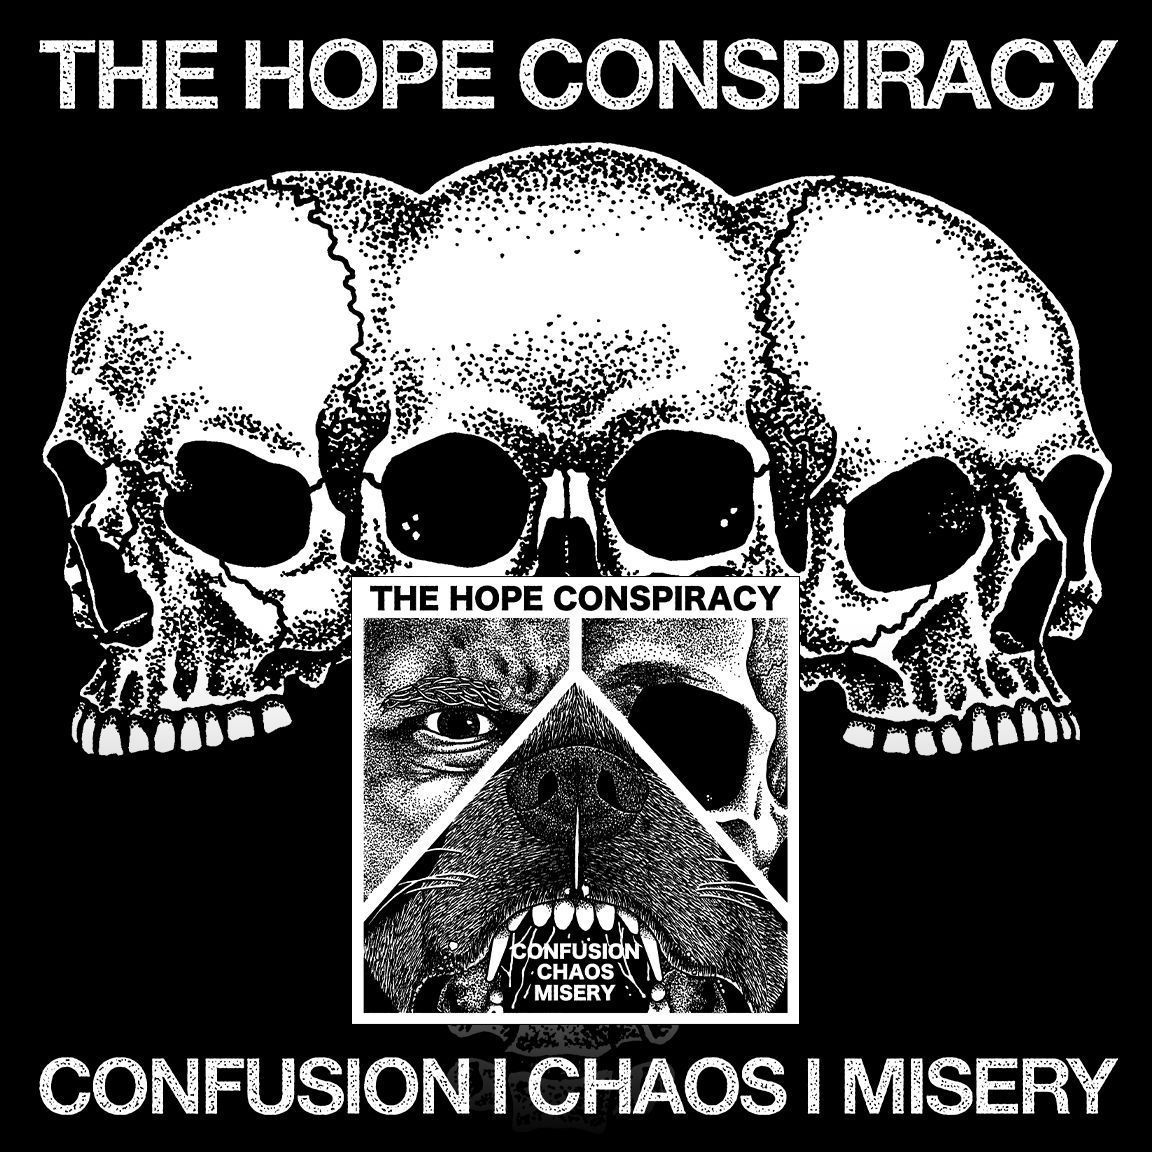 The Hope Conspiracy 'Confusion/Chaos/Misery' EP Music & Merch → thehopeconspiracy.com 'Confusion/Chaos/Misery' is a four song EP, engineered by Kurt Ballou and Zach Weeks at God City Studios. Artwork for the release was created by Alexander Heir (Death/Traitors).